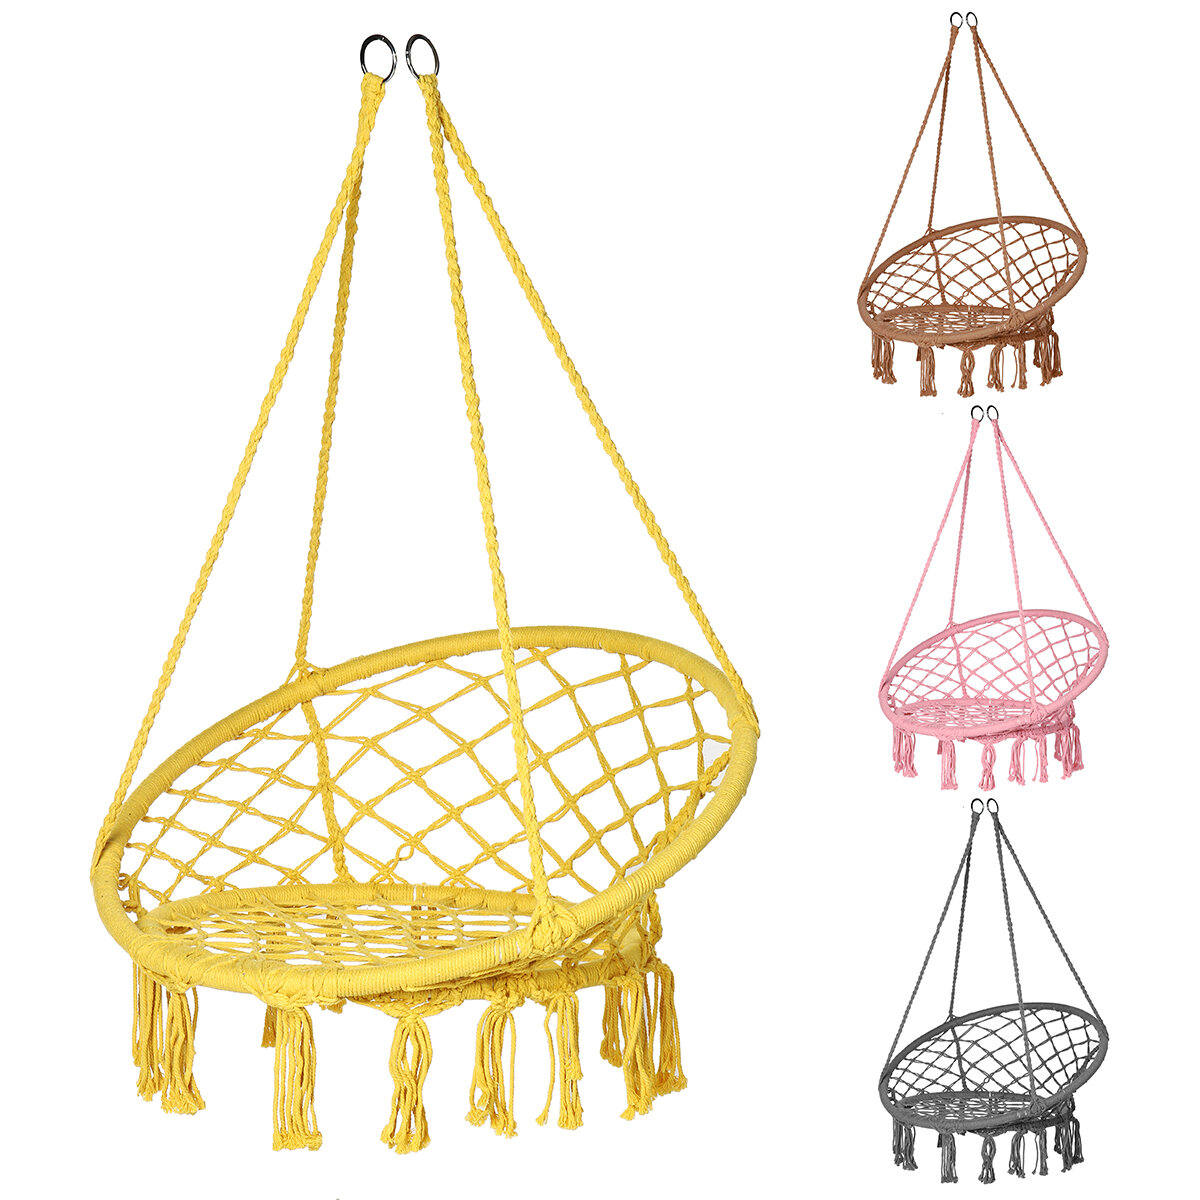 Cotton Metal Swing Seat Hanging Chair Hammock Max Load 240kg for Outdoor Garden Camping